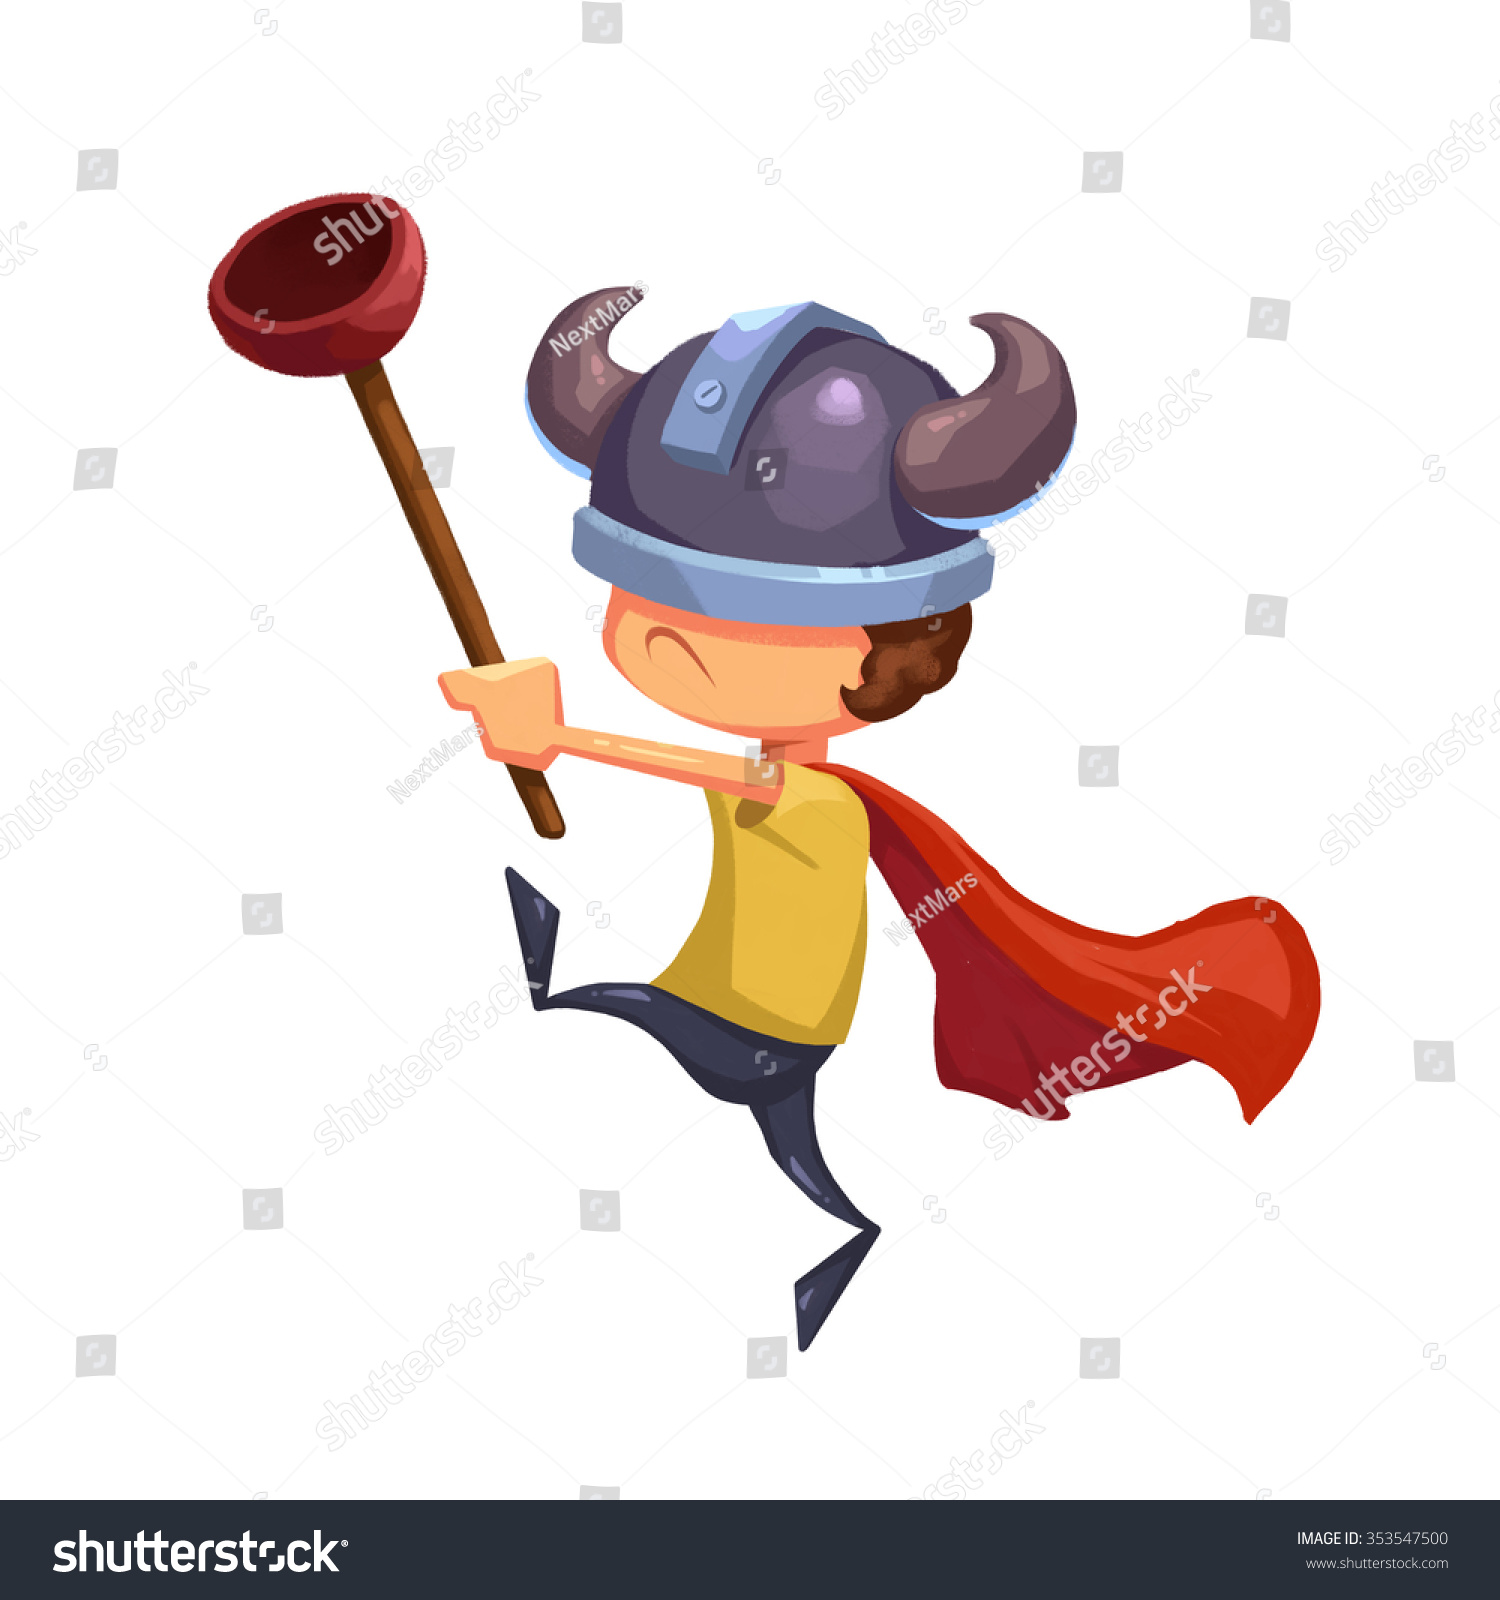 stock-photo-illustration-for-children-the-super-kid-hero-with-toilet-plunger-and-viking-hat-realistic-353547500